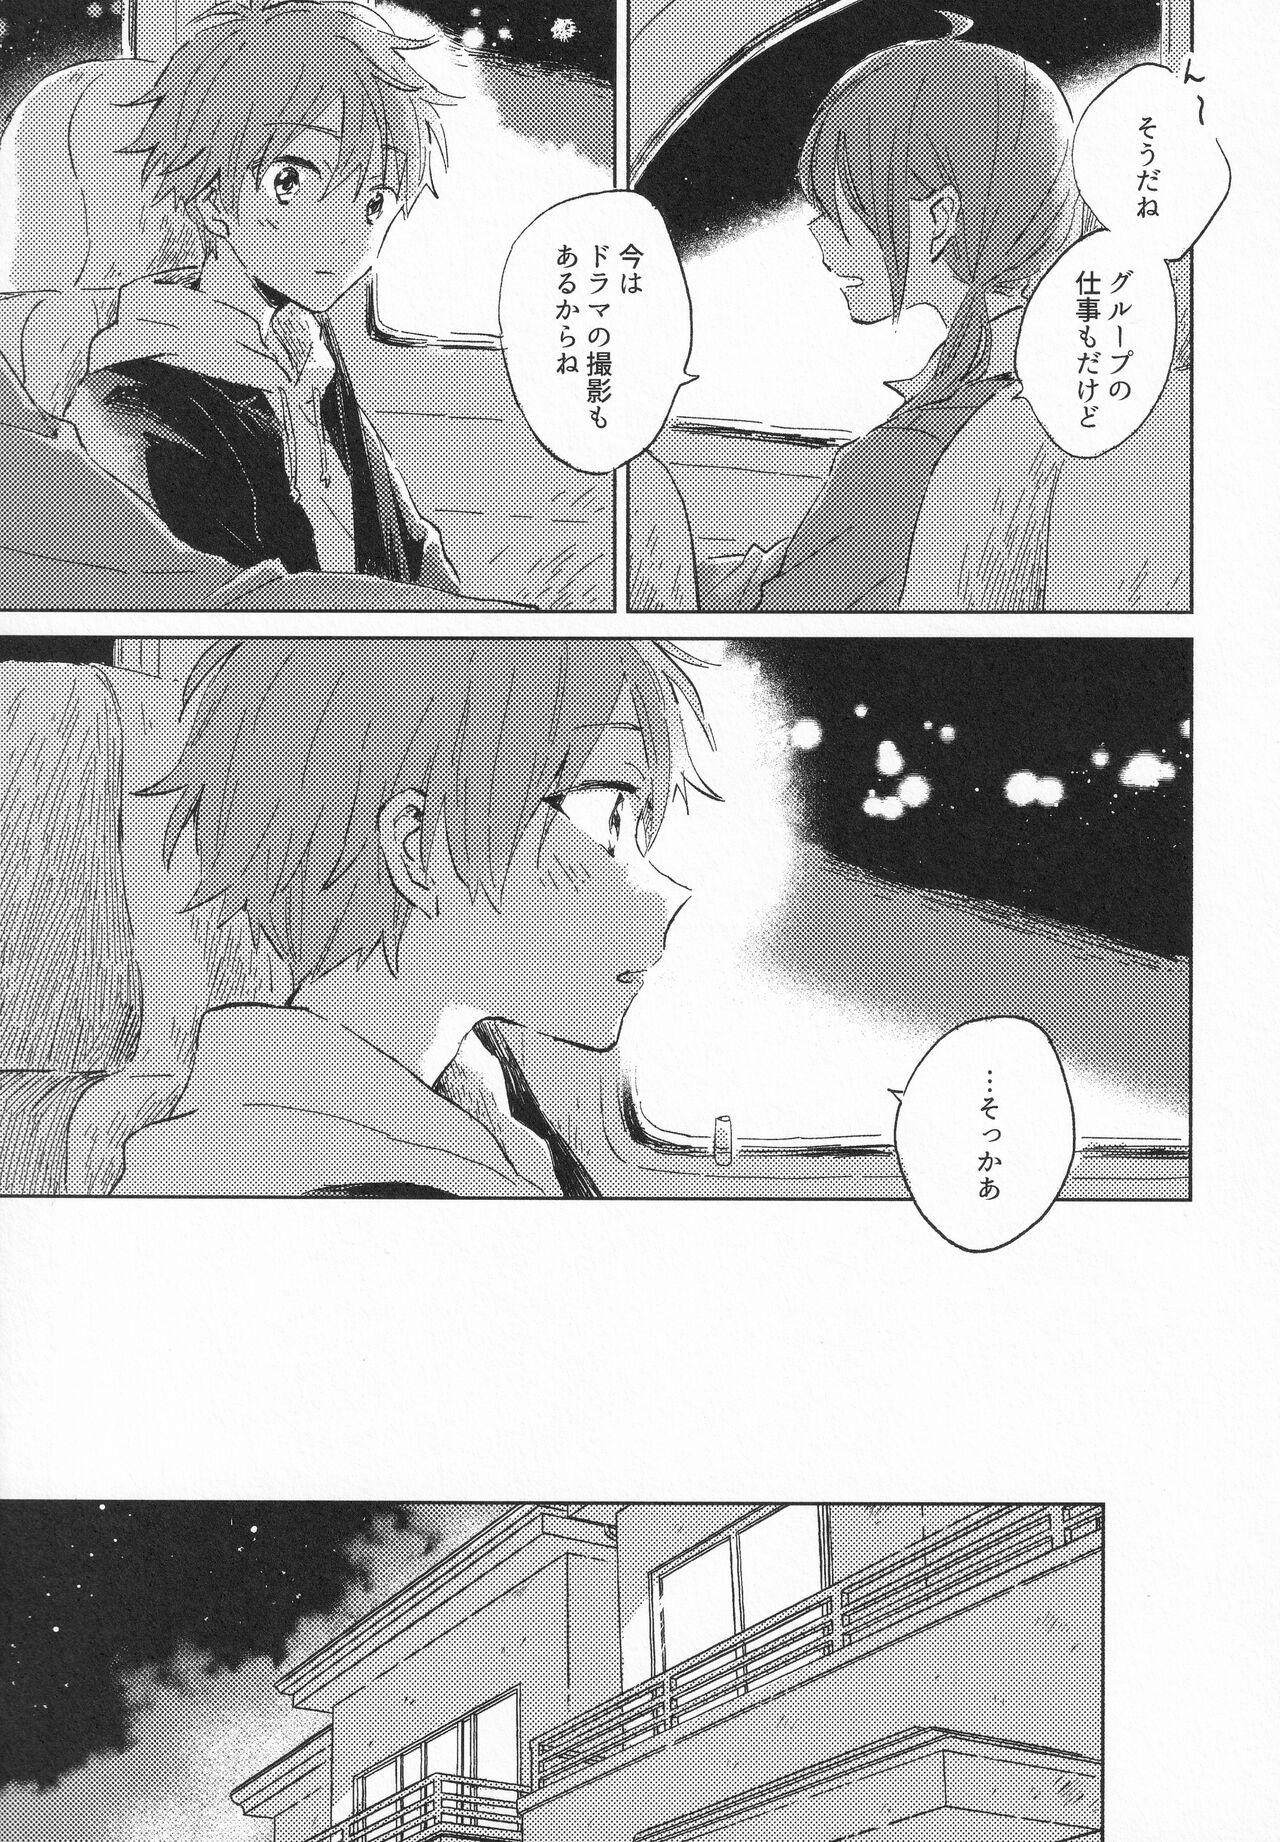 Shecock On the stroke of 9pm, the spell will be broken - The idolmaster sidem Masseur - Page 9